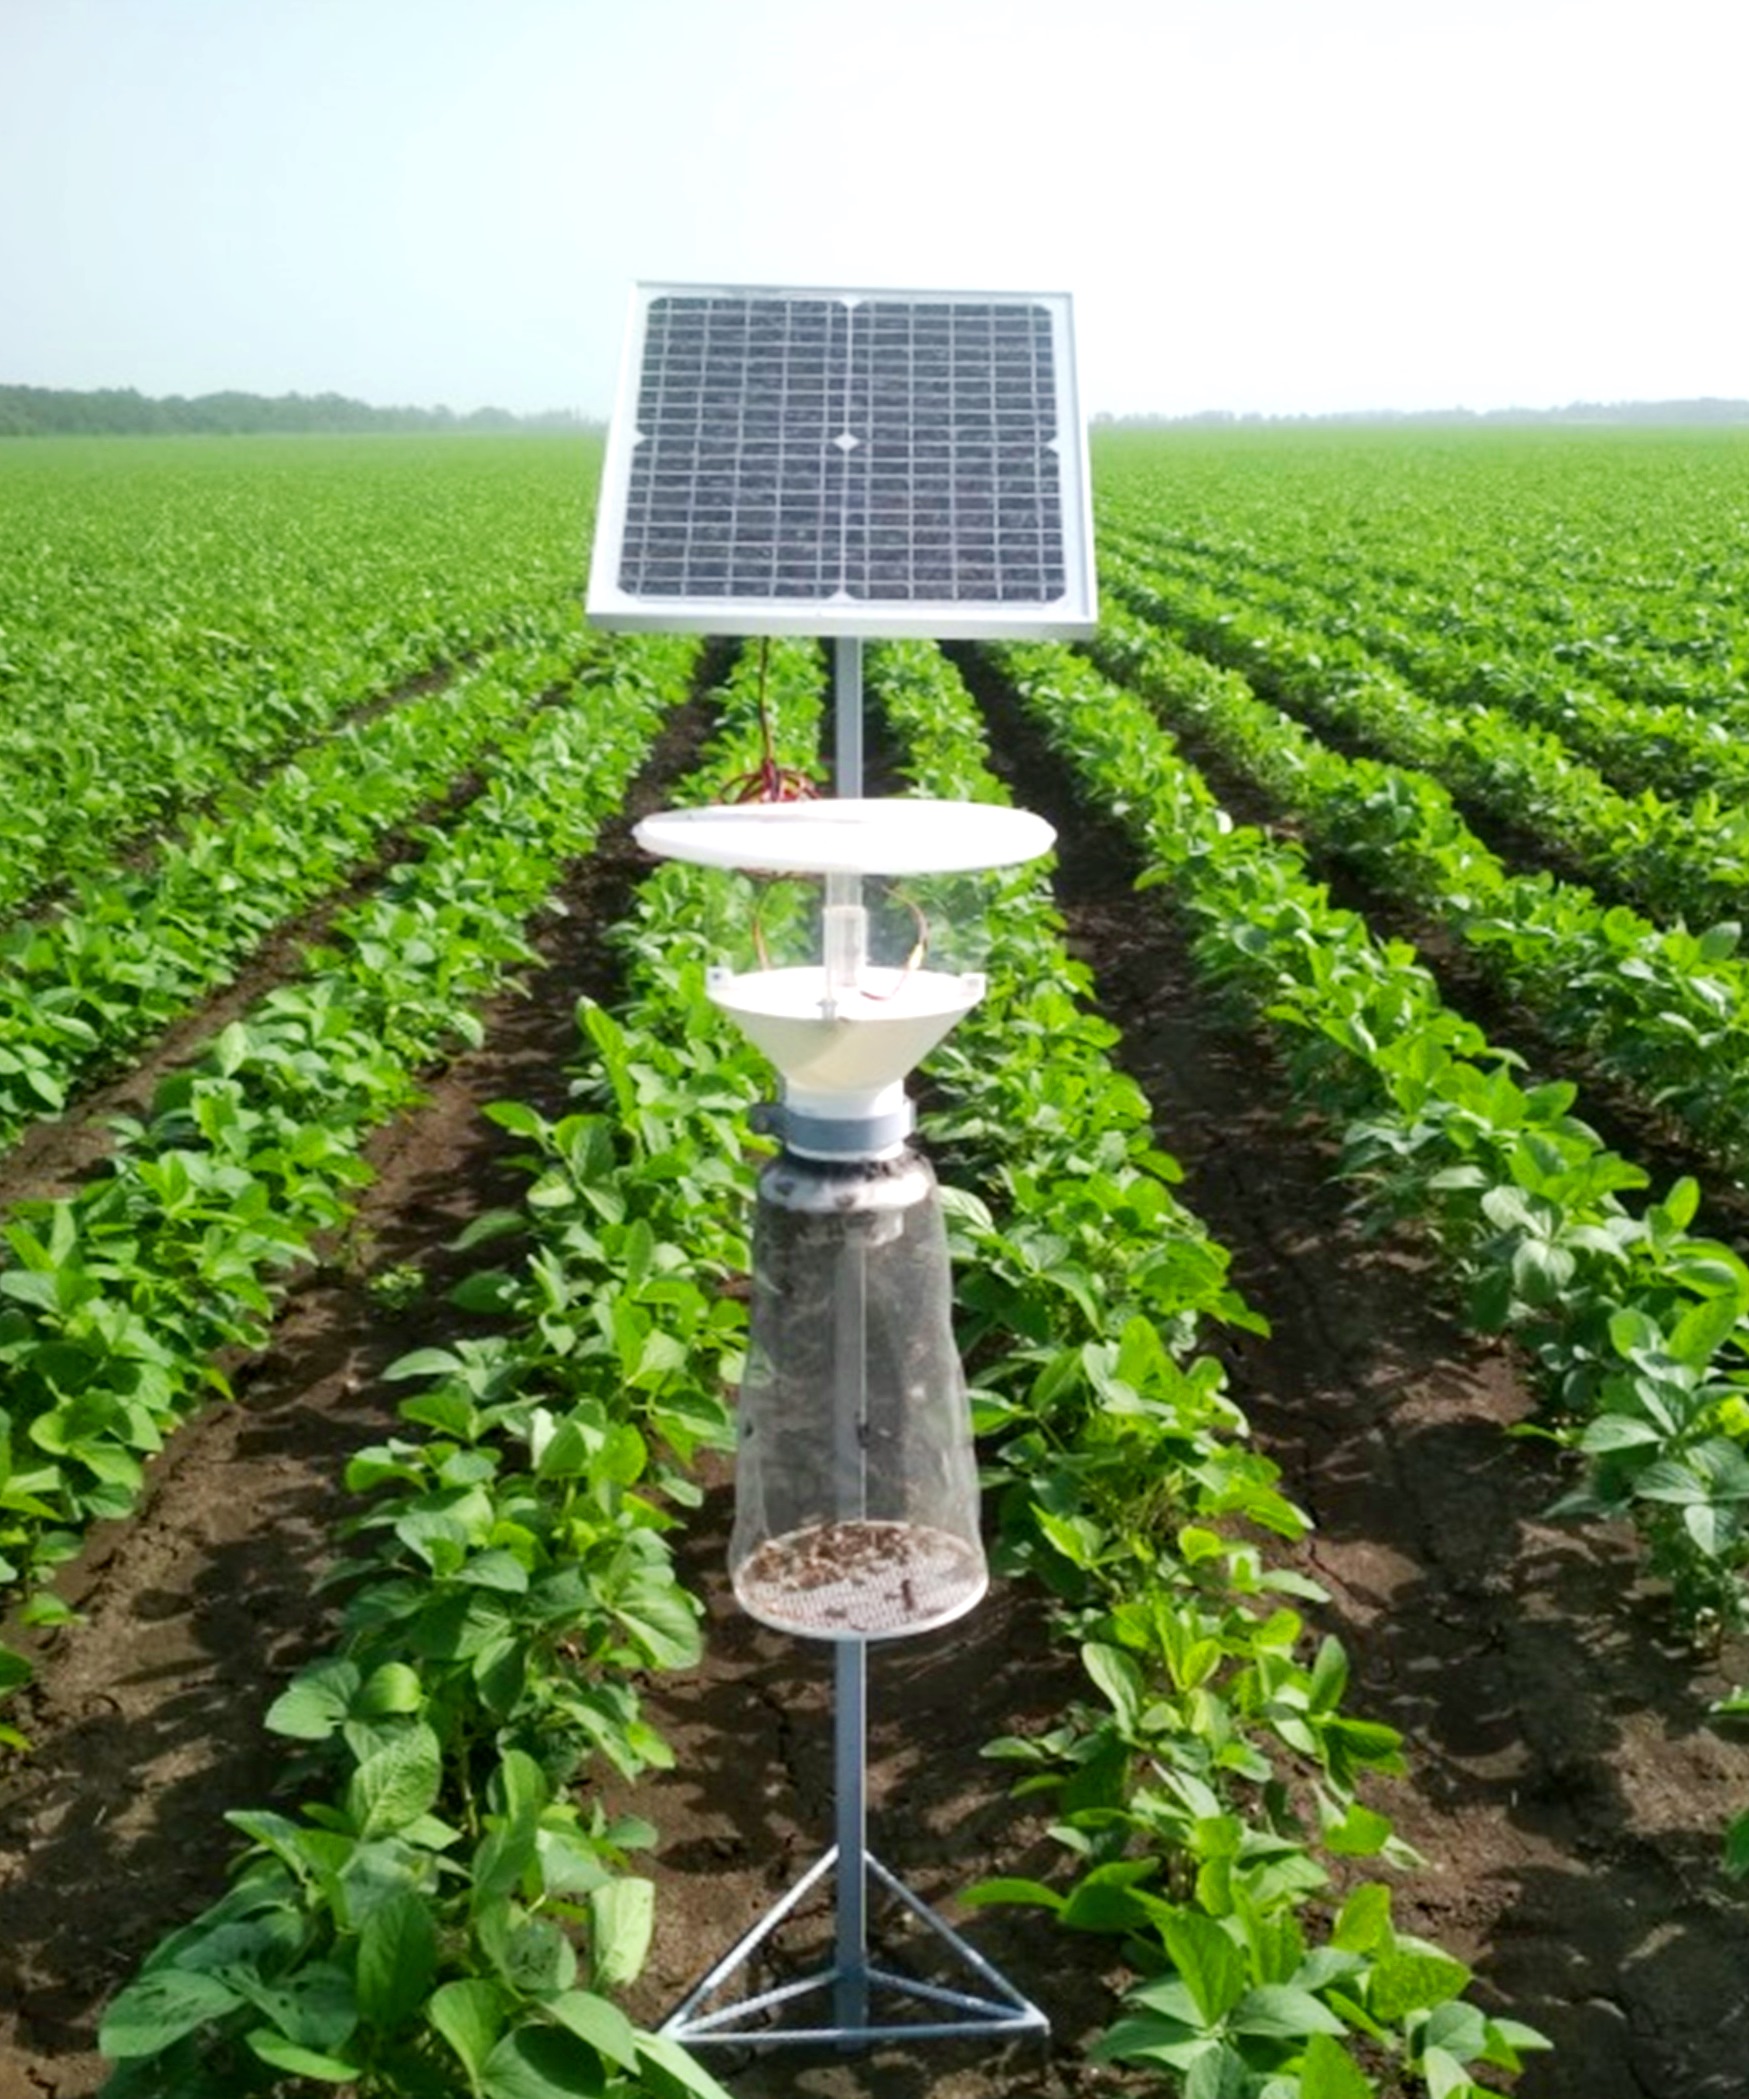 Light Traps to Study Insect Species Diversity in Soybean Crops